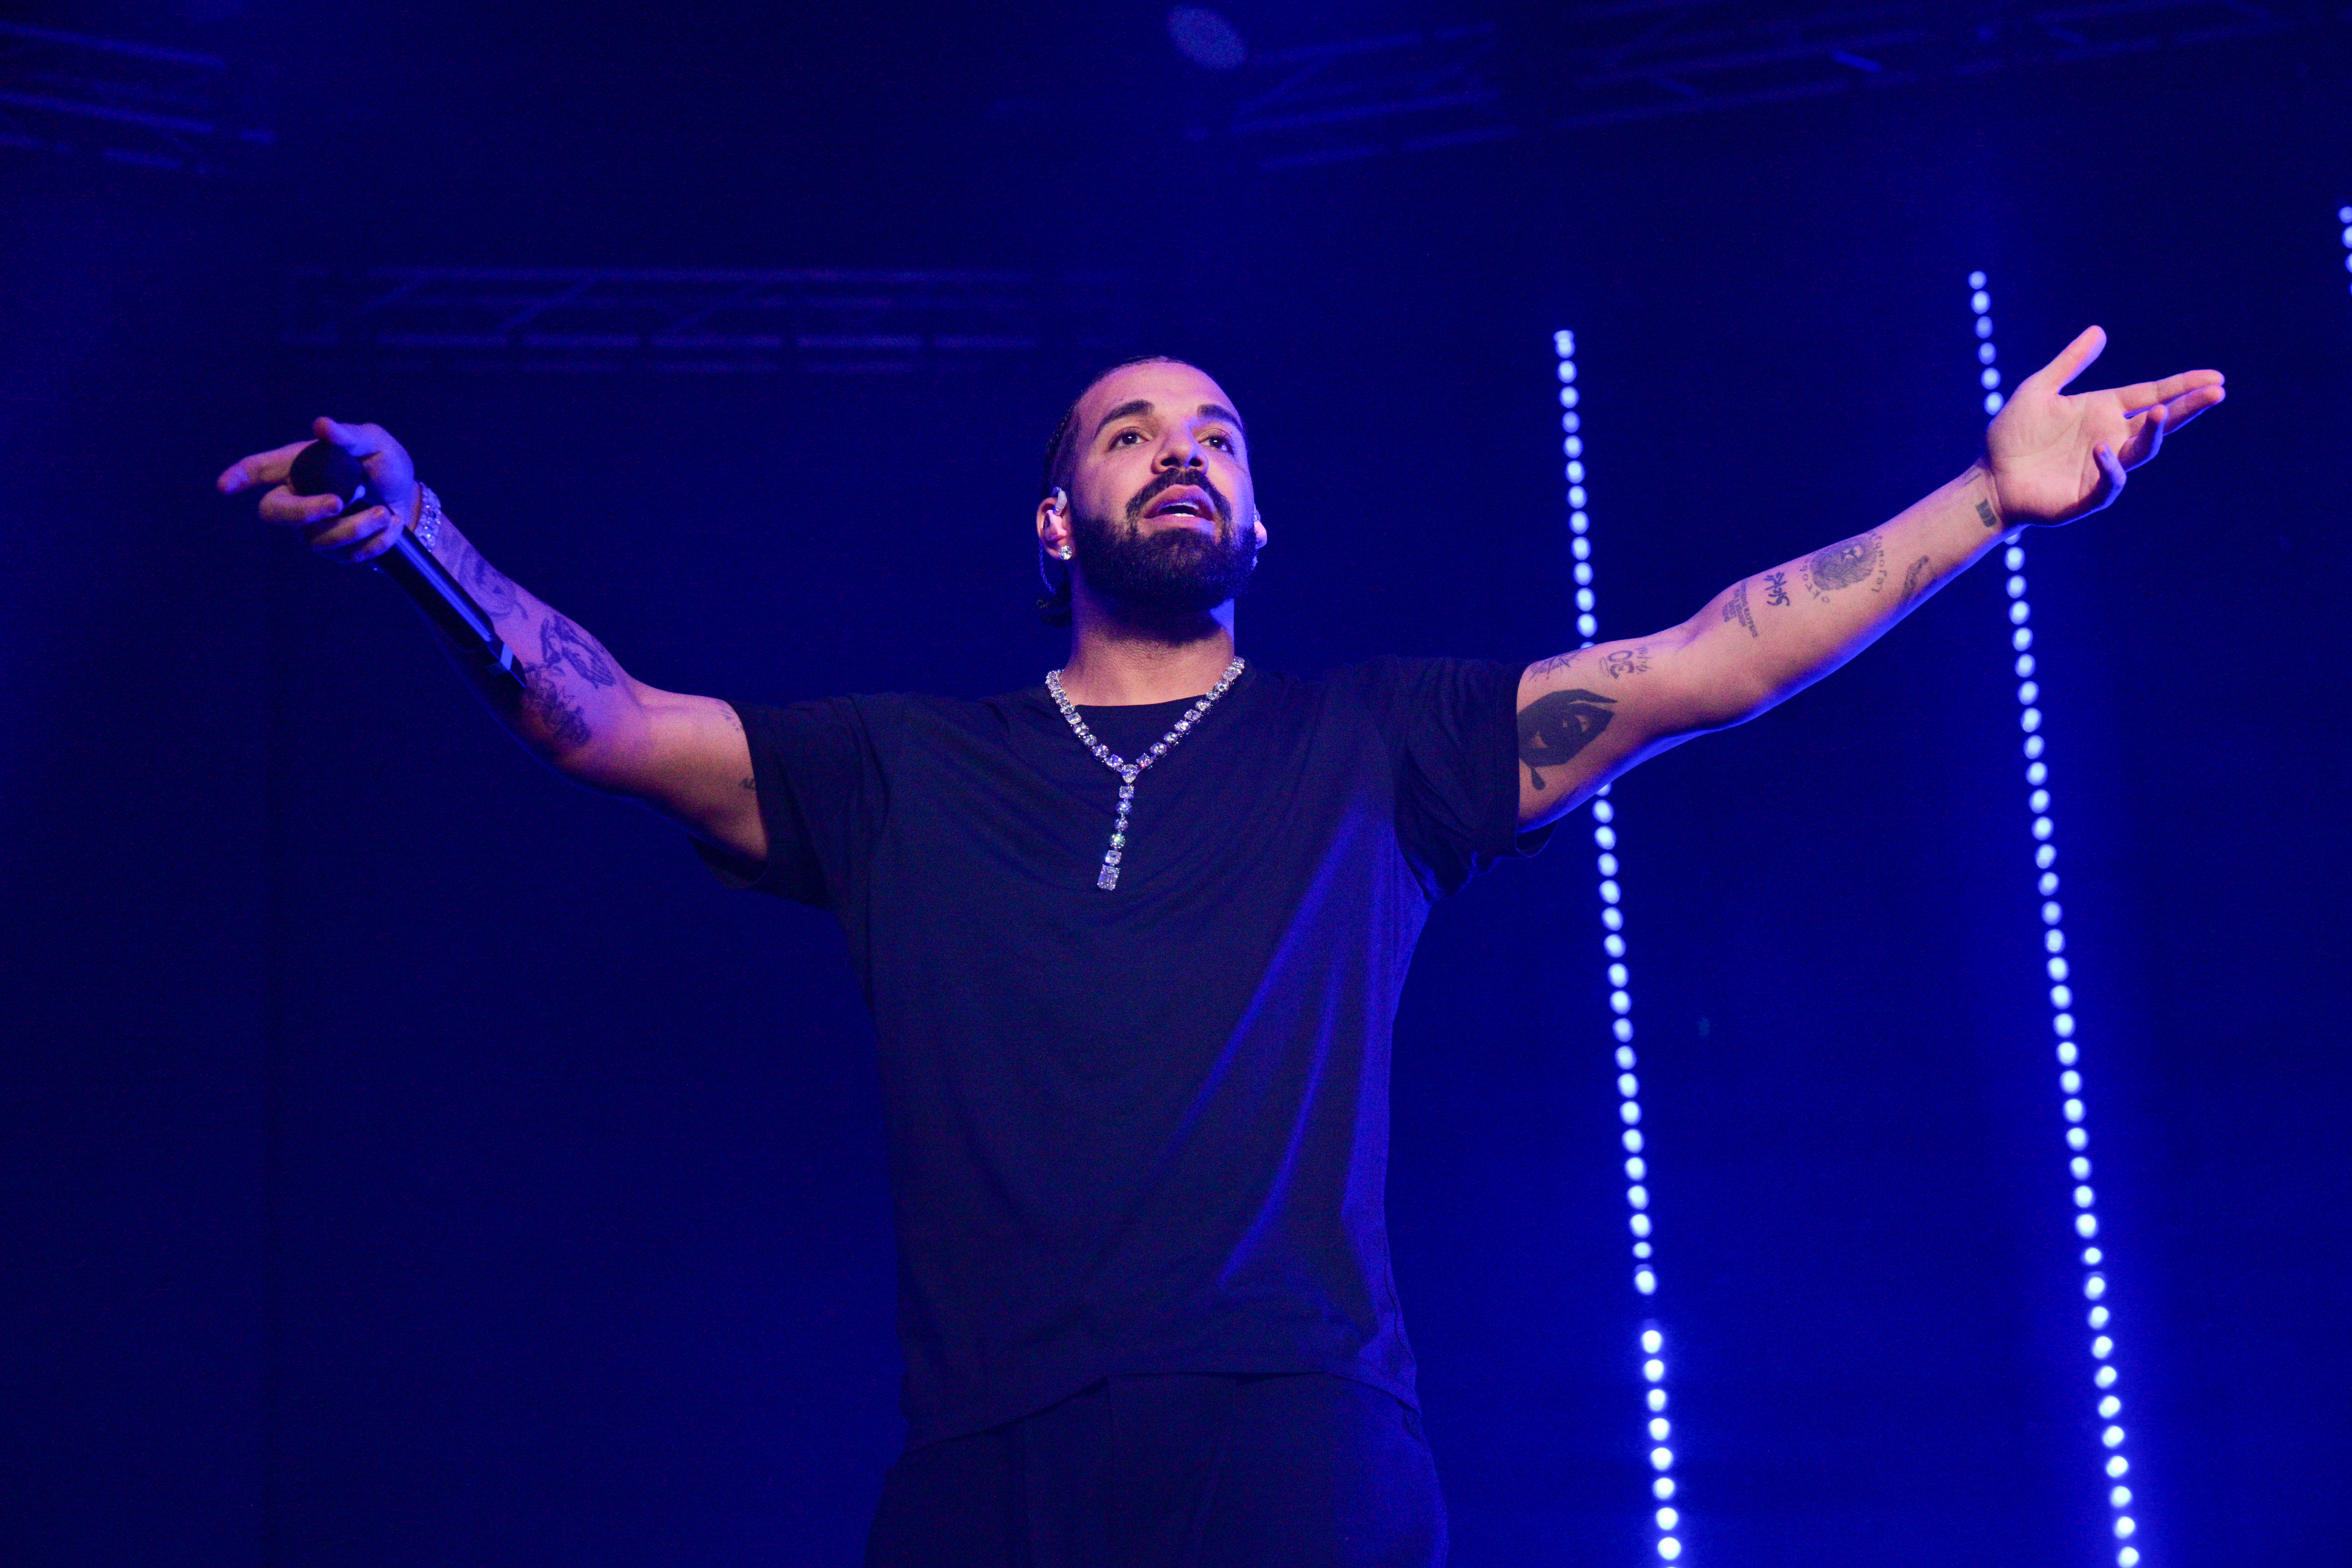 Drake onstage with his arms open wide.